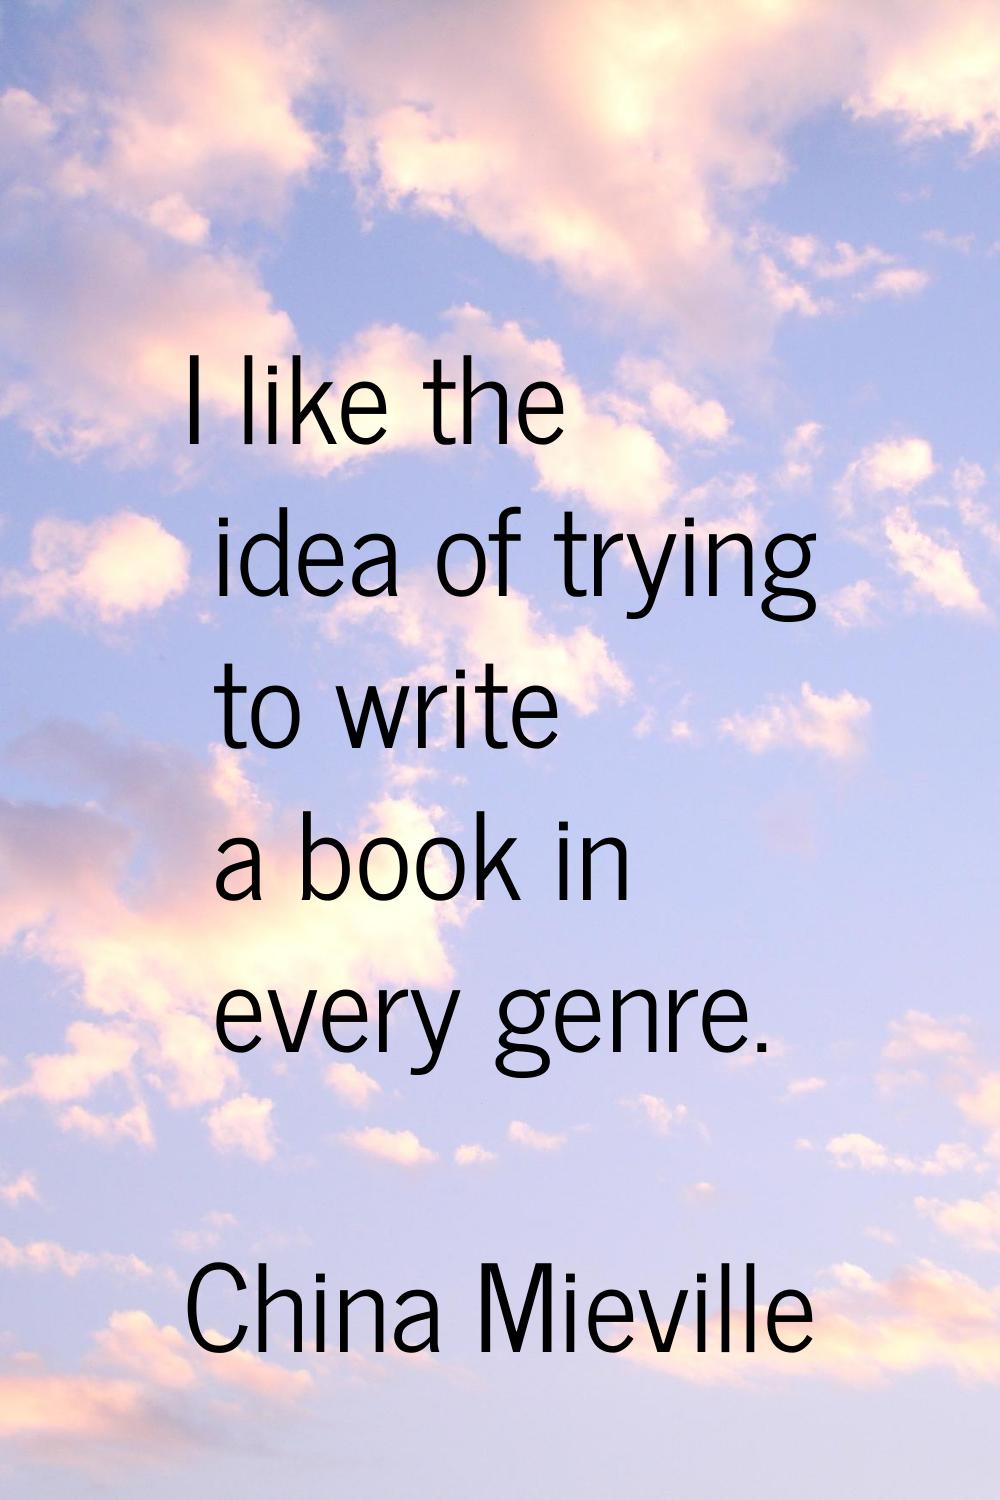 I like the idea of trying to write a book in every genre.